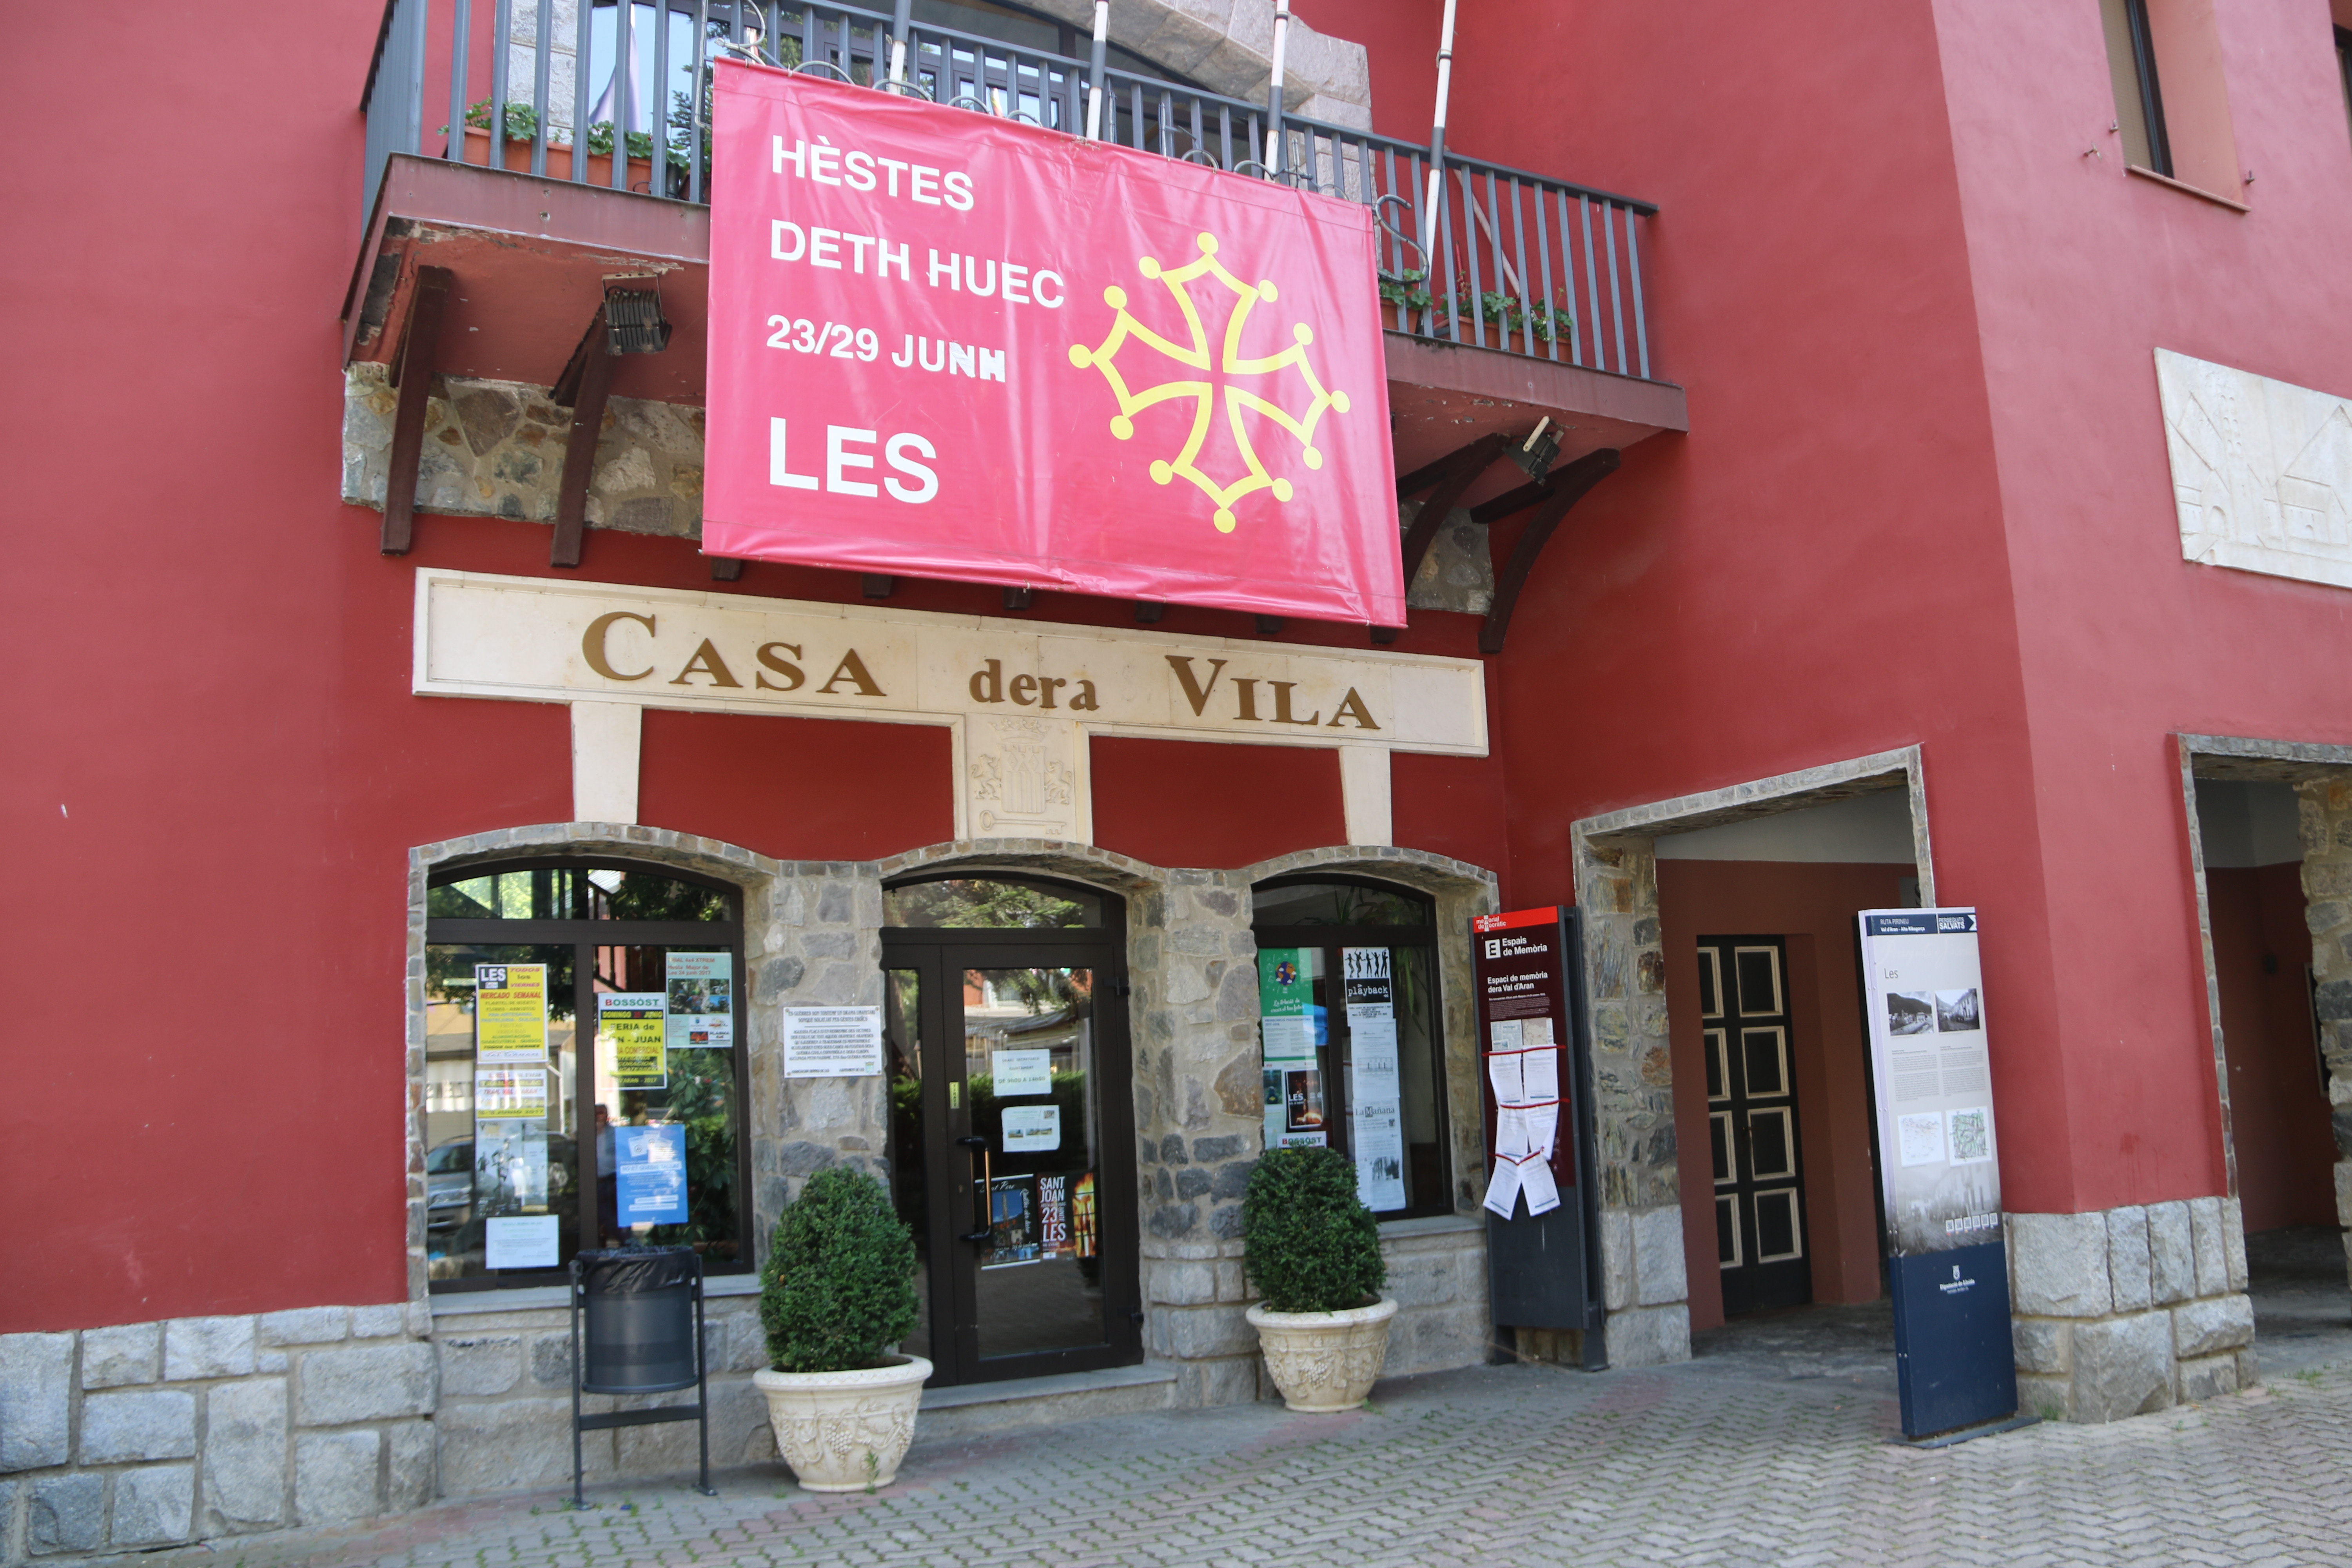 The town hall of Les, in the Val d'Aran, with a poster announcing the dates for a local celebration (by Marta Lluvich)